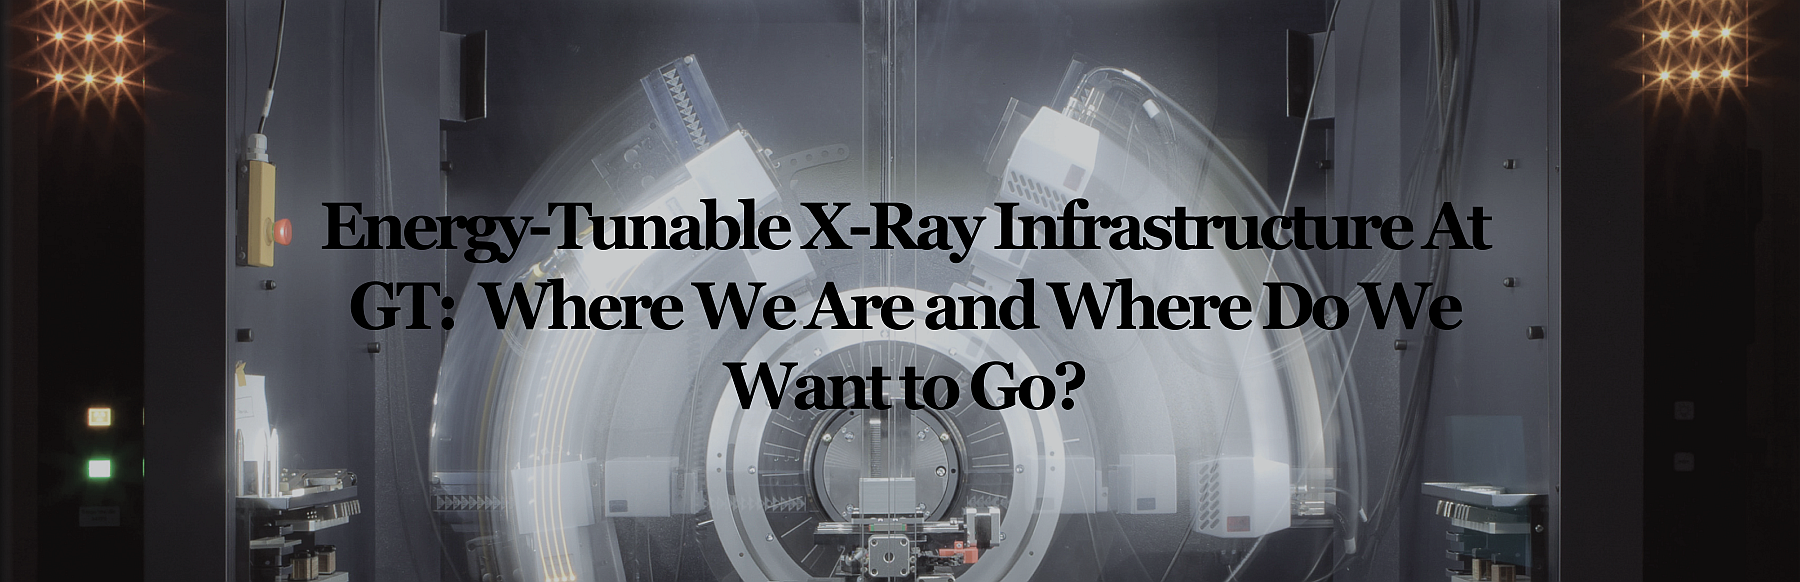 Graphic for Energy-Tunable X-Ray Infrastructure At GT: Where We Are and Where Do We Want to Go?